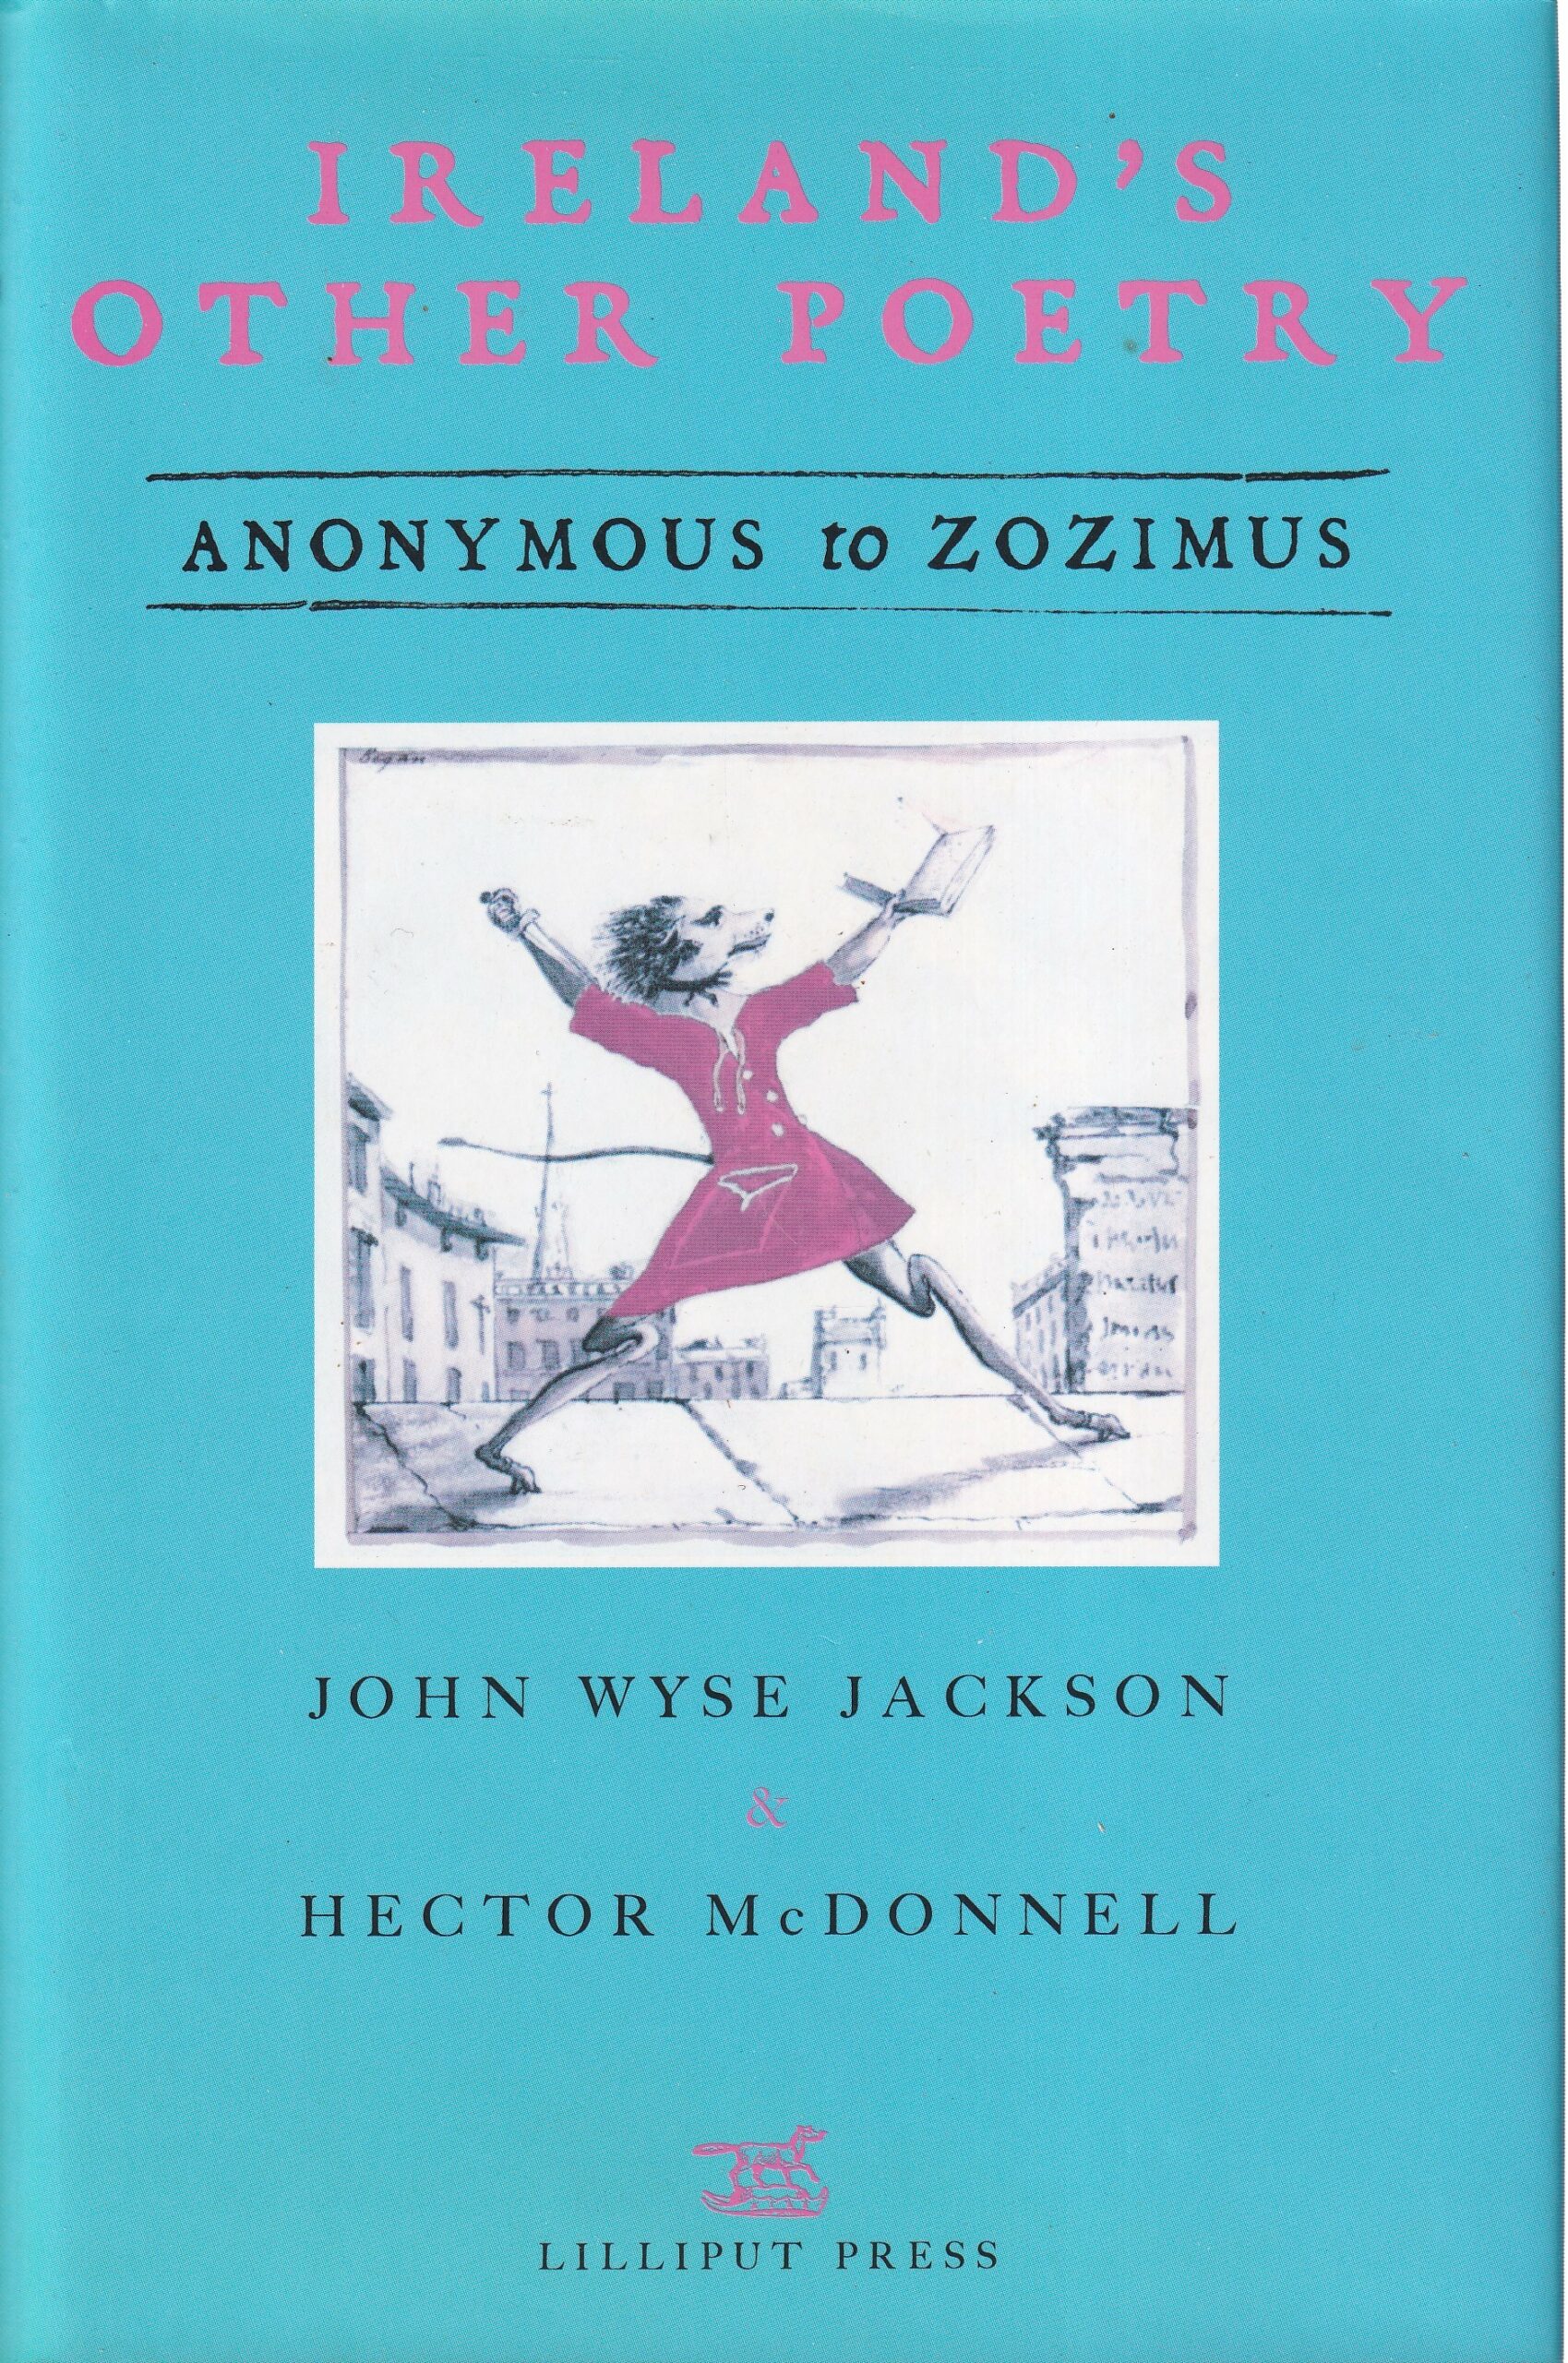 Ireland’s Other Poetry: Anonymous to Zozimus by John Wyse Jackson and Hector McDonnell